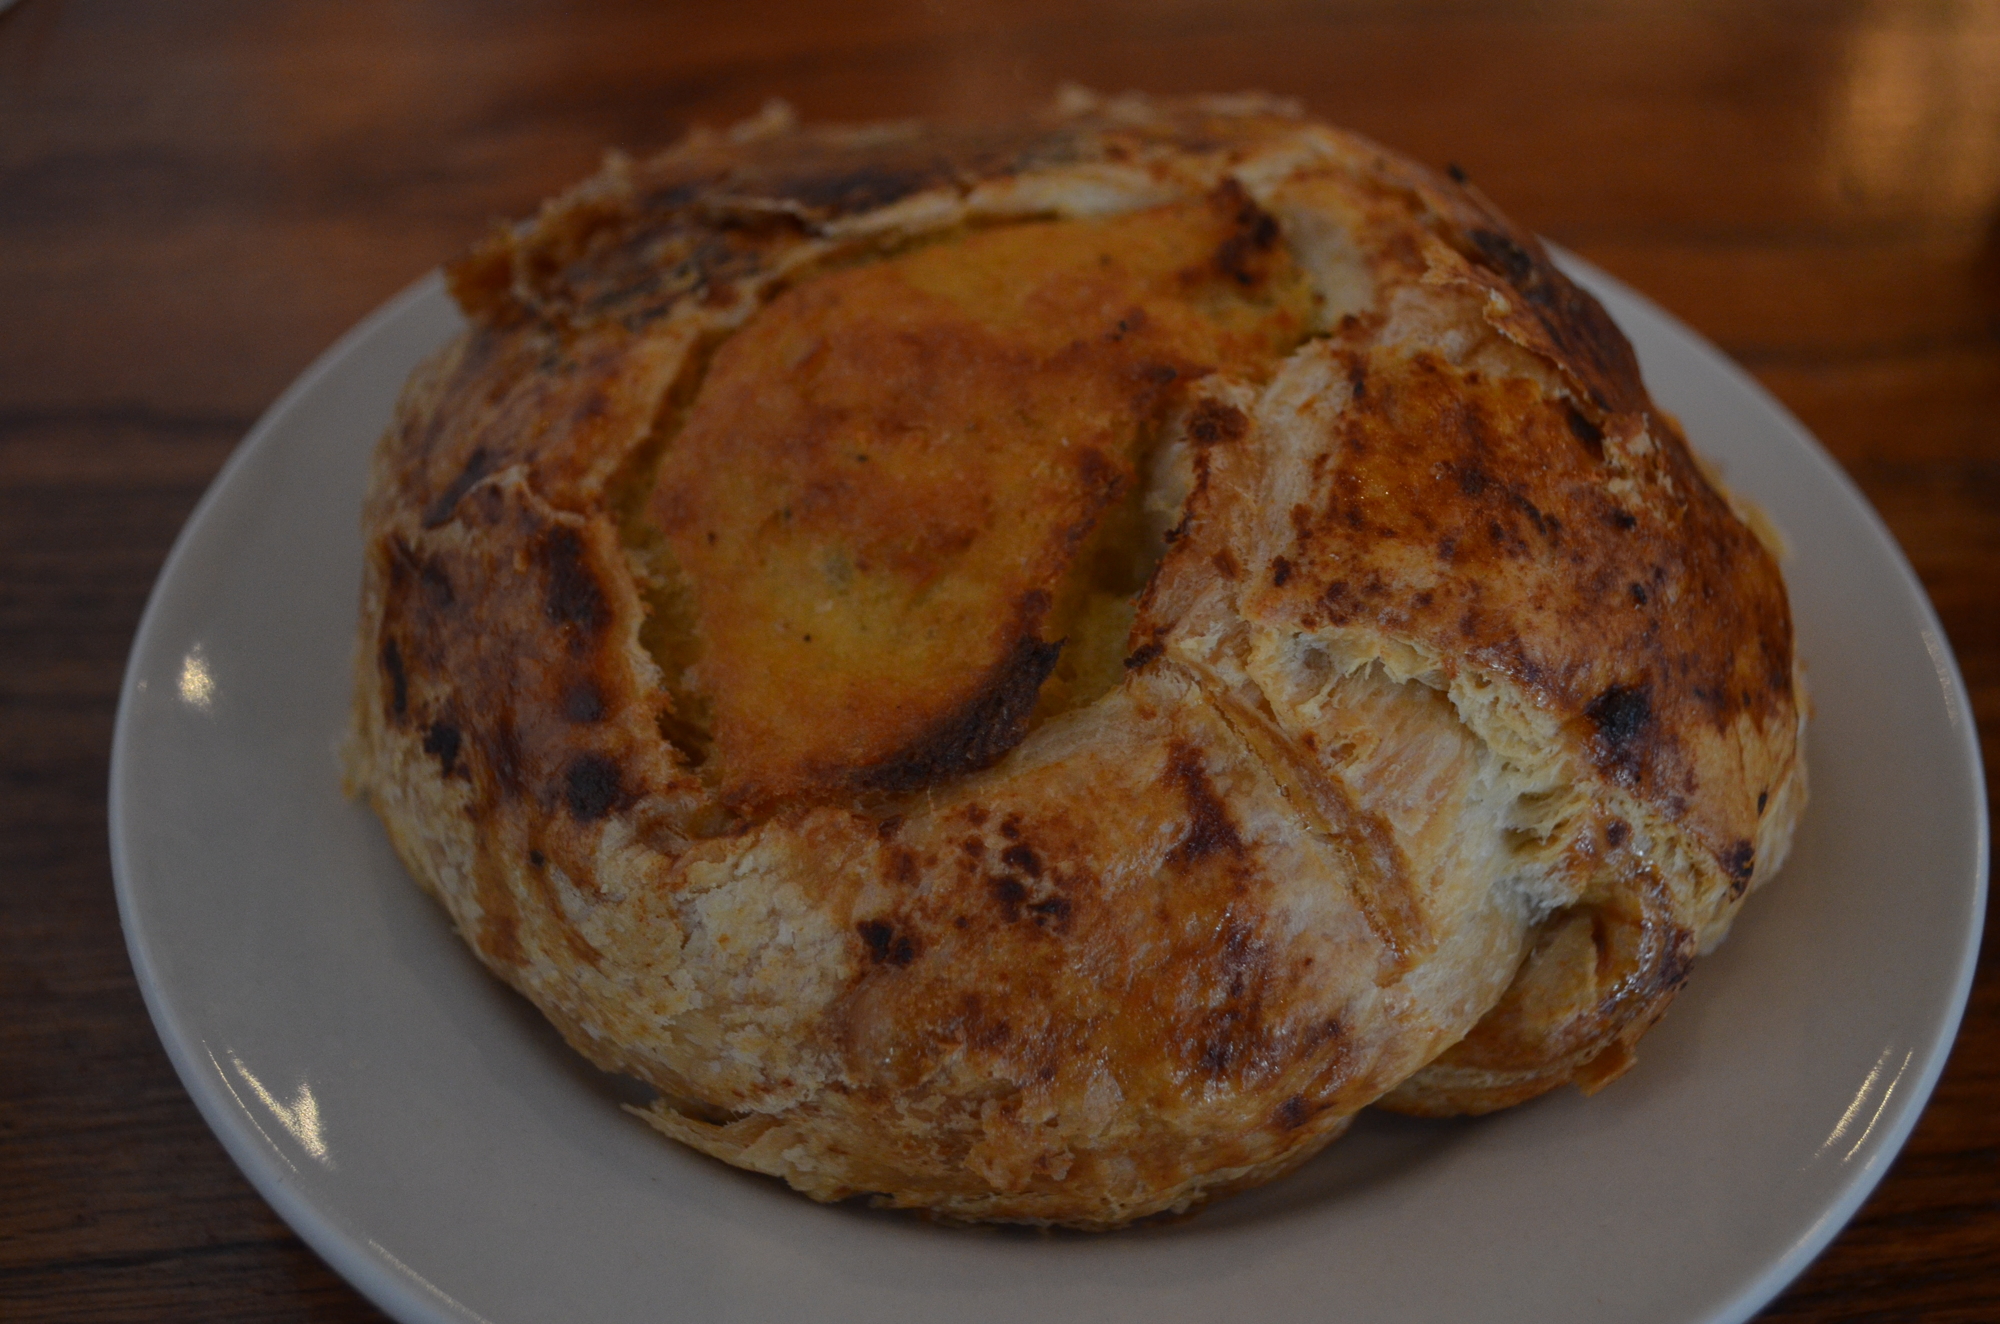 Knish: The knish is one of Shenker’s favorite dishes to prepare. It has a warm and flaky exterior and is traditionally filled with potatoes or meat.